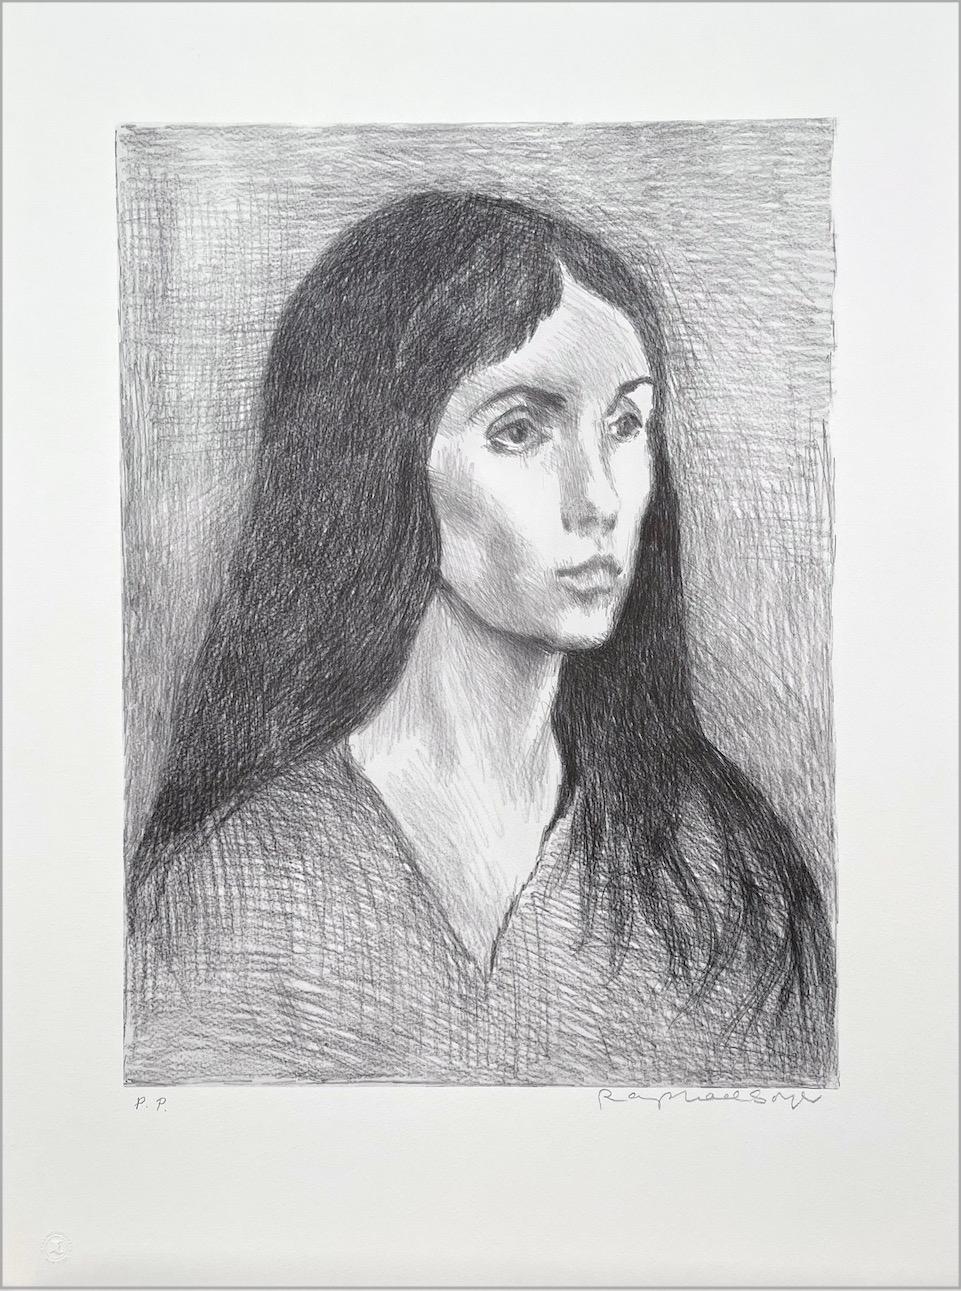 WOMAN LONG DARK HAIR Signed Lithograph, Female Portrait, V-Neck Top, Realism